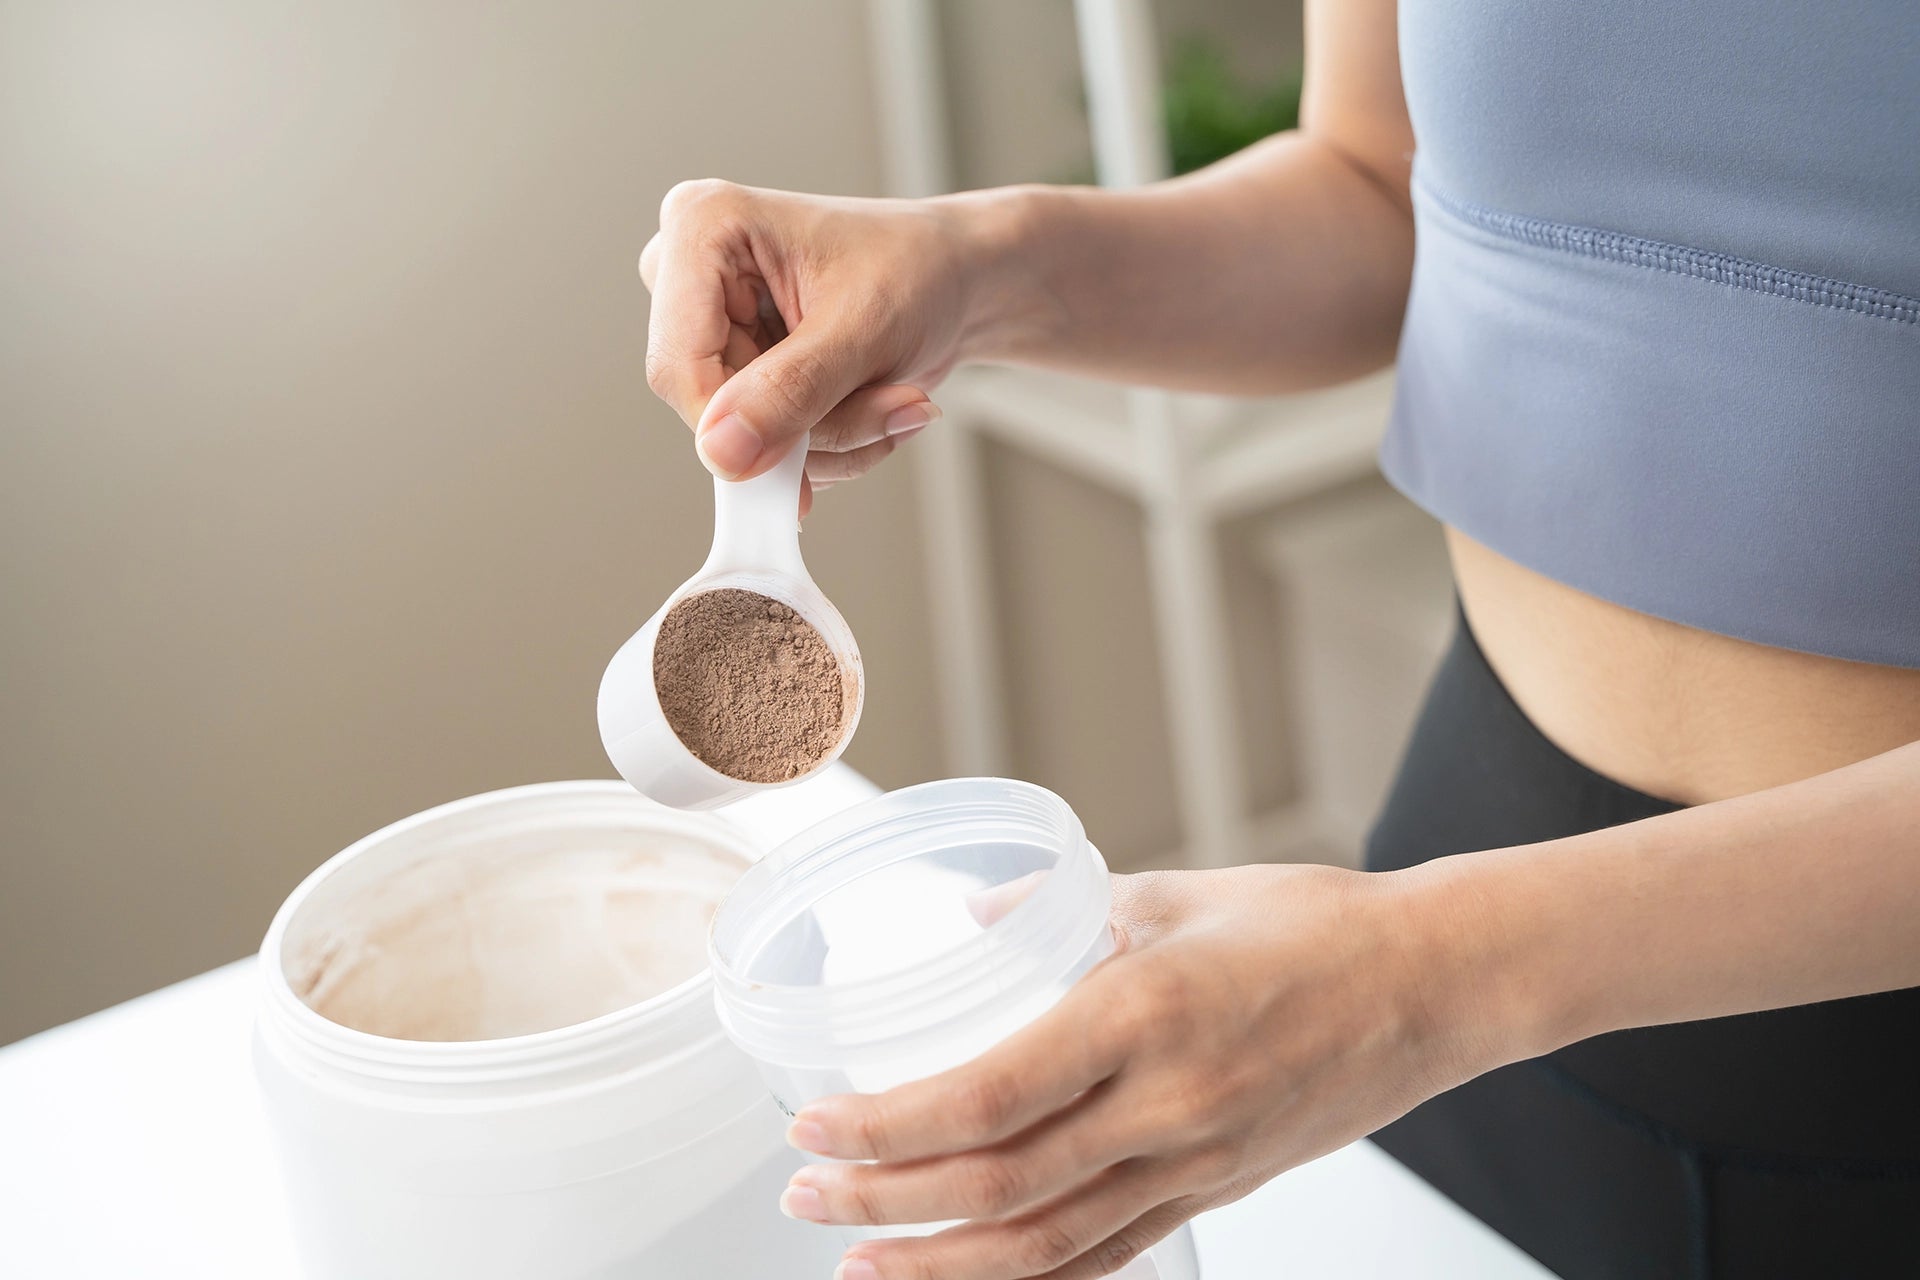 Woman scooping an unbranded protein powder